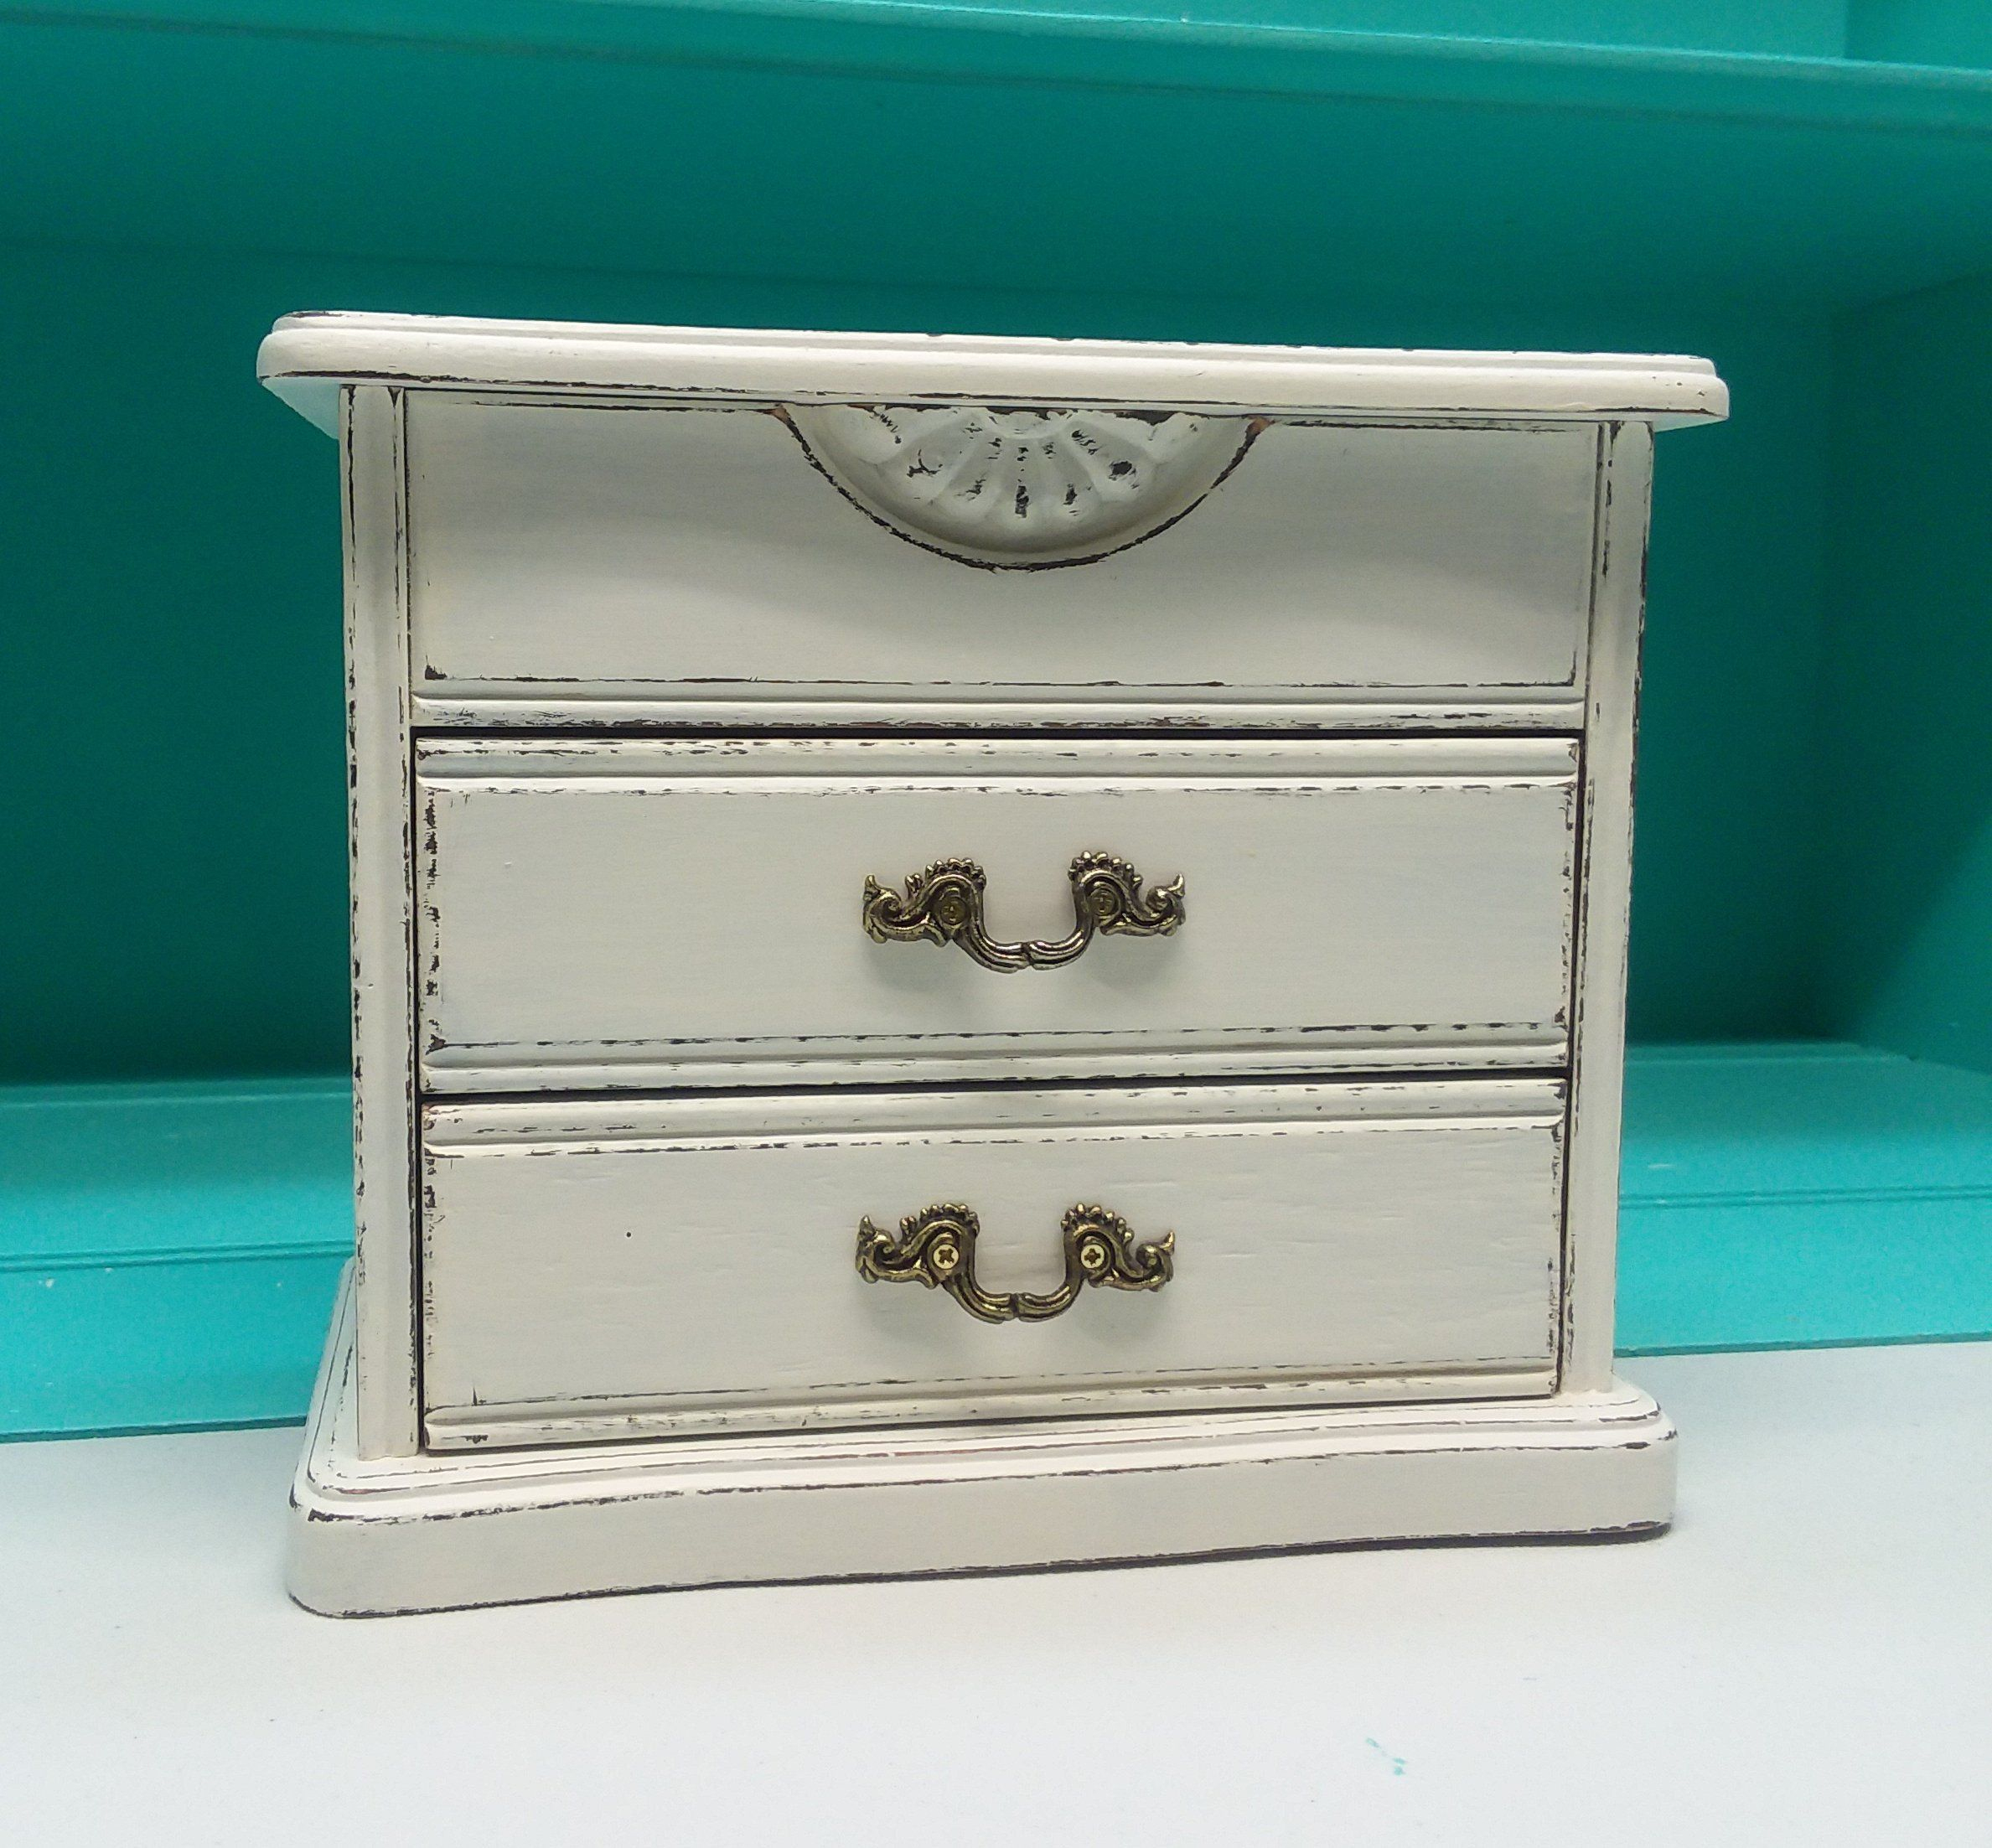 Shabby Chic Vintage Wooden Jewelry Box Painted Off White dedans Jewellery Box Shabby Chic 